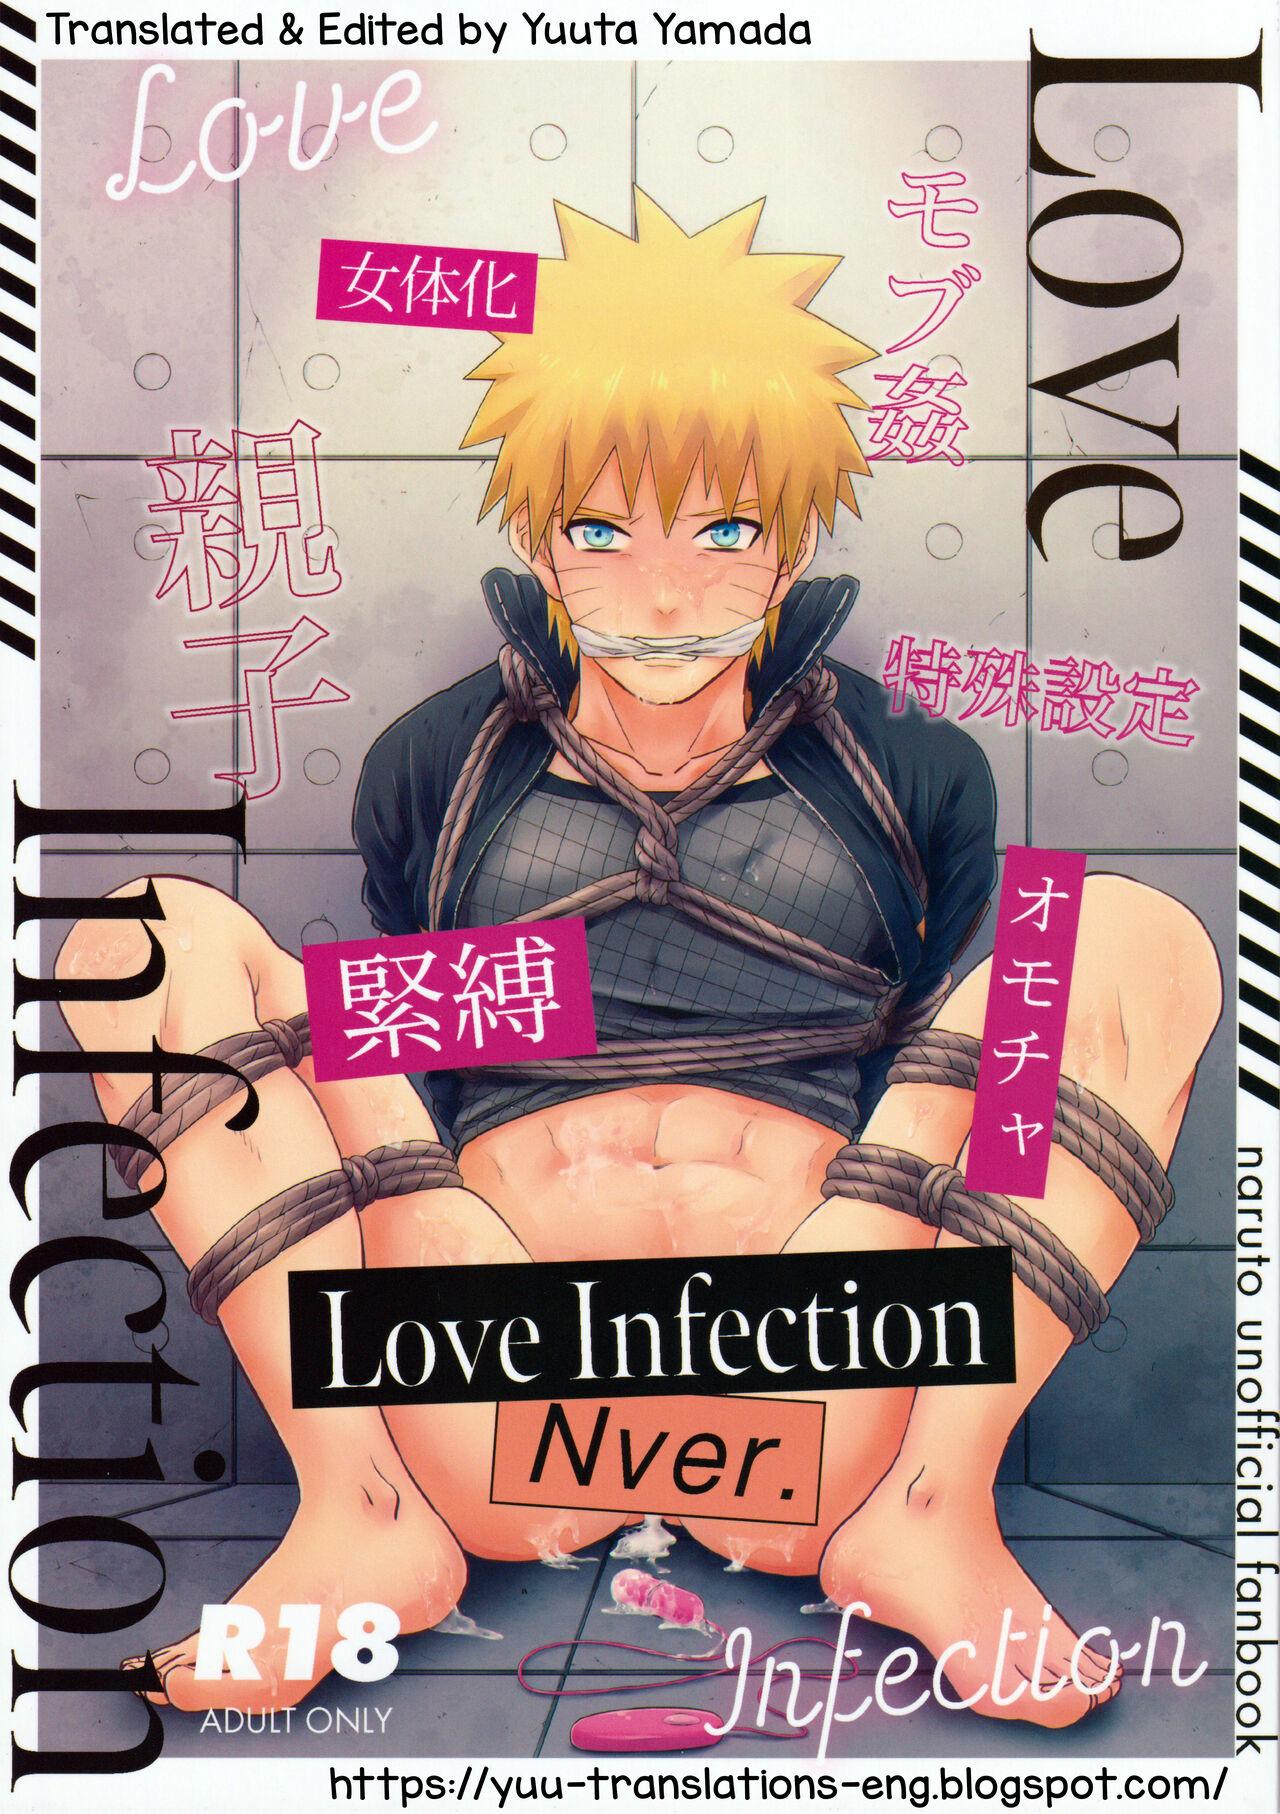 Love Infection N Ver. 0